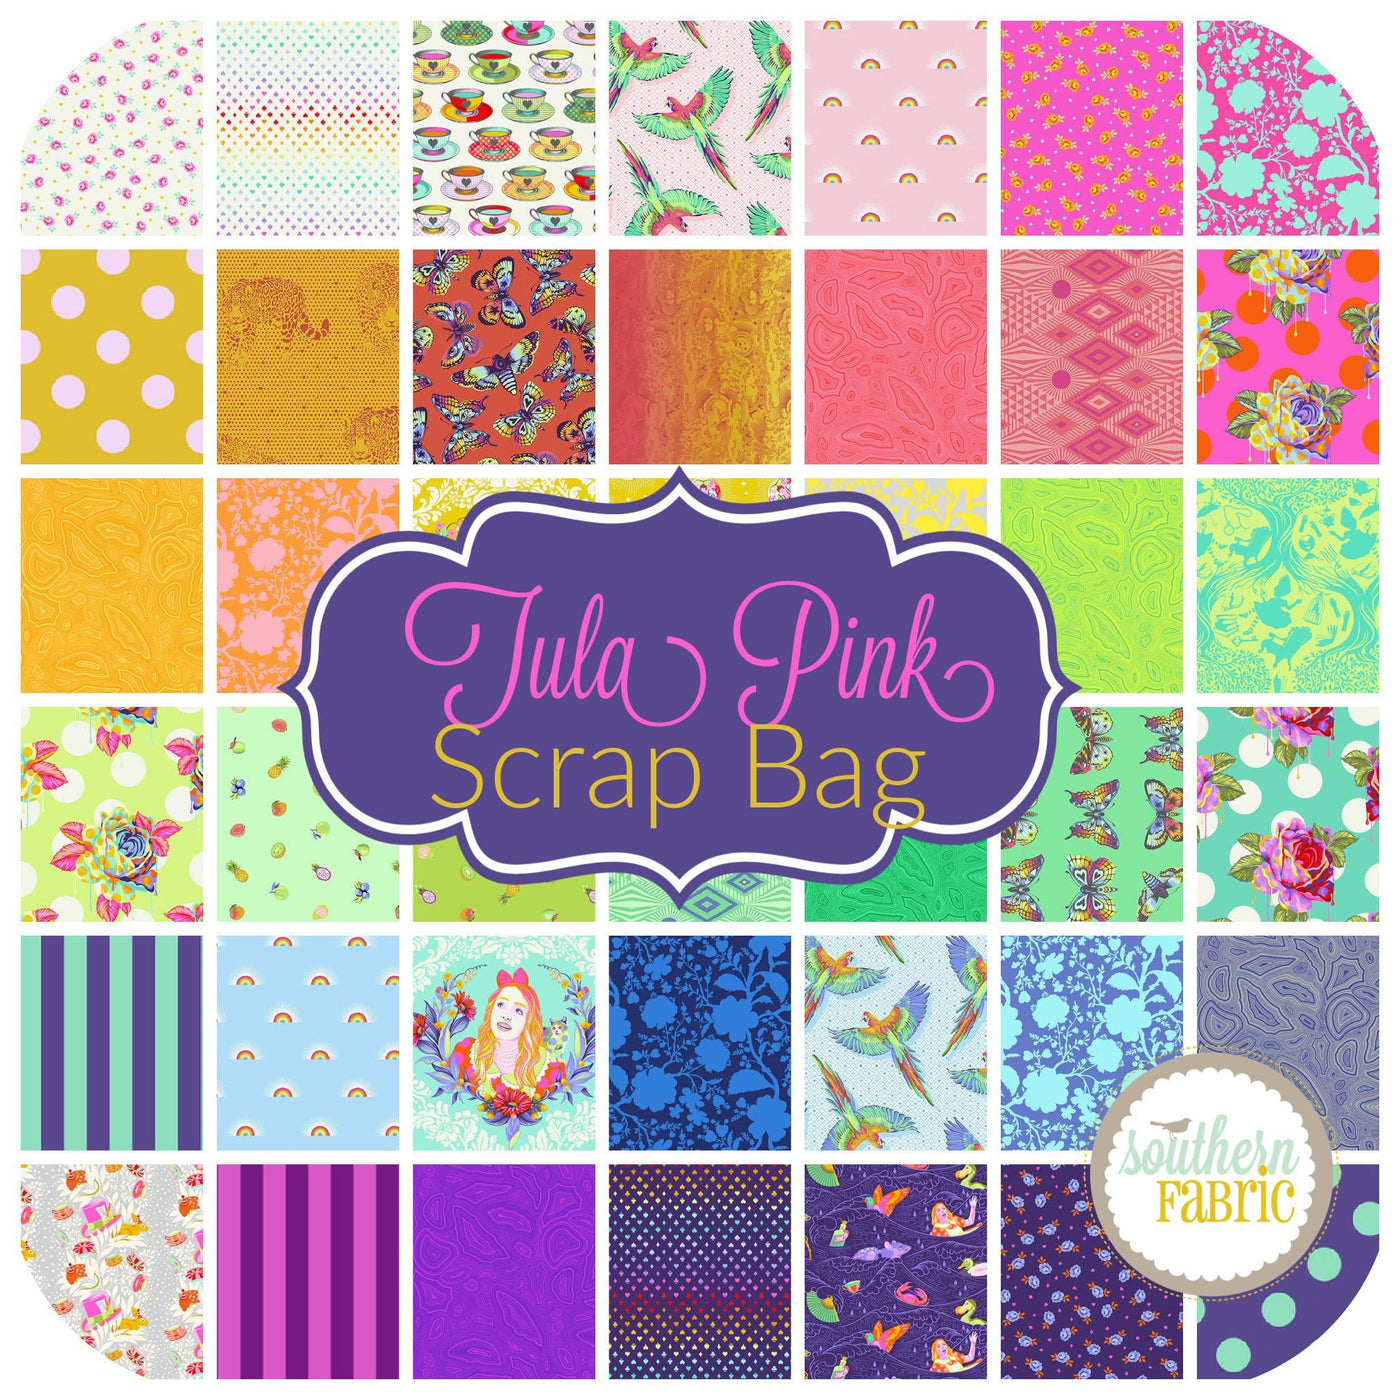 Tula Pink Scrap Bag (approx 2 yards) by Tula Pink for Free Spirit